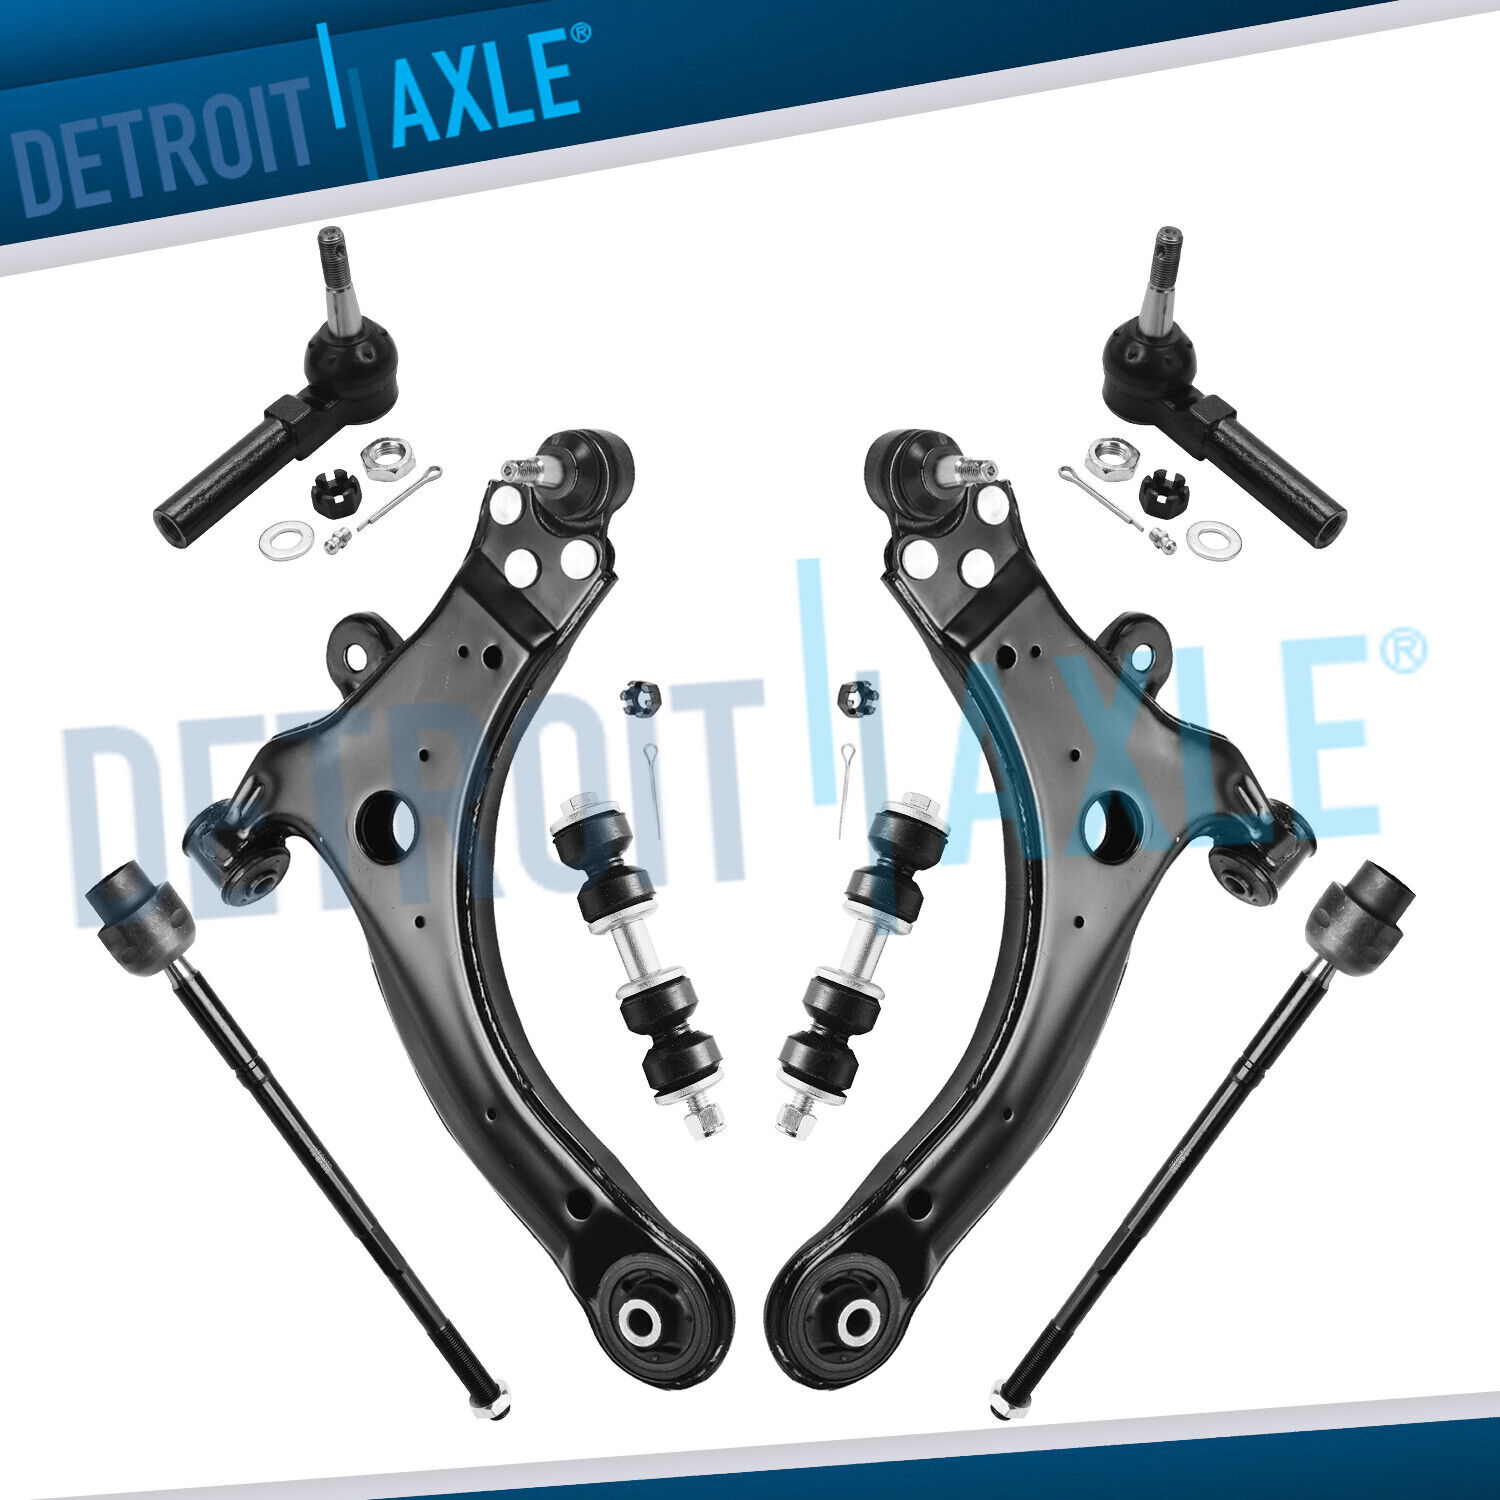 Front Control Arms + Tie Rods Sway Bars for Impala Monte Carlo Buick & Lacrosse